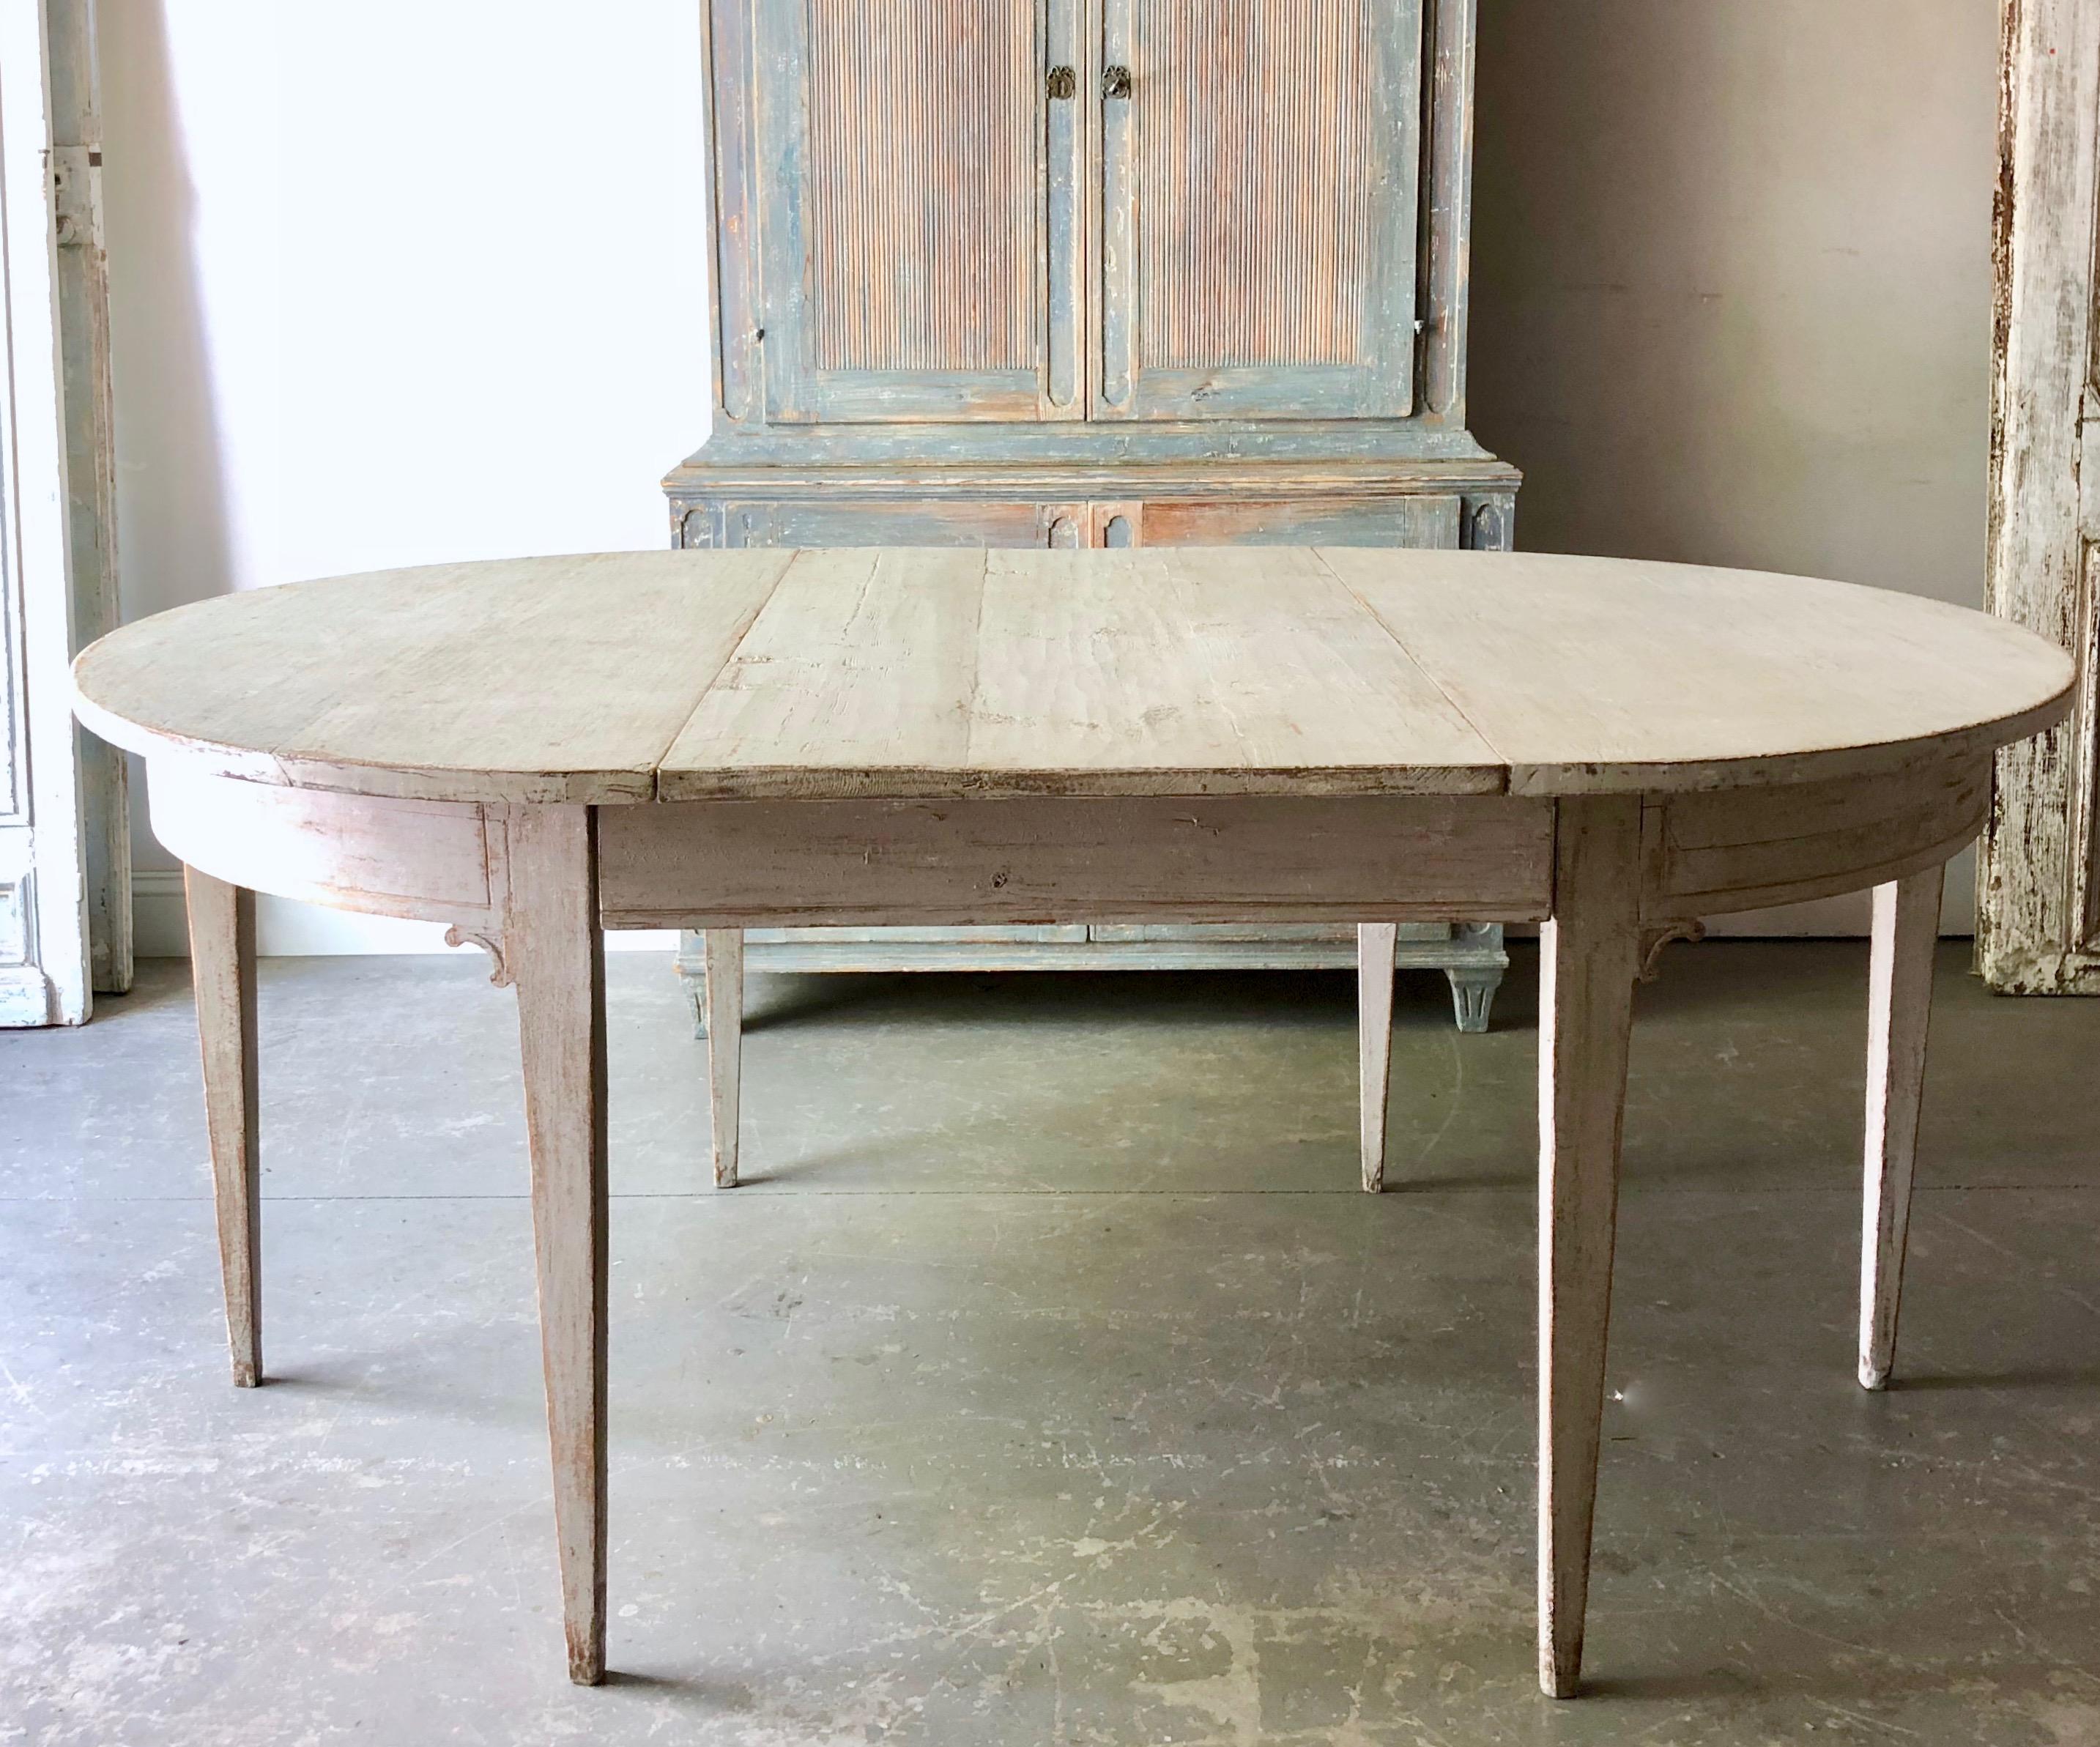 Early 19th century later painted Gustavian period extending table with two leaves and tapered legs. A practical piece that can be used as round table or extended with one or two leaves up to 92